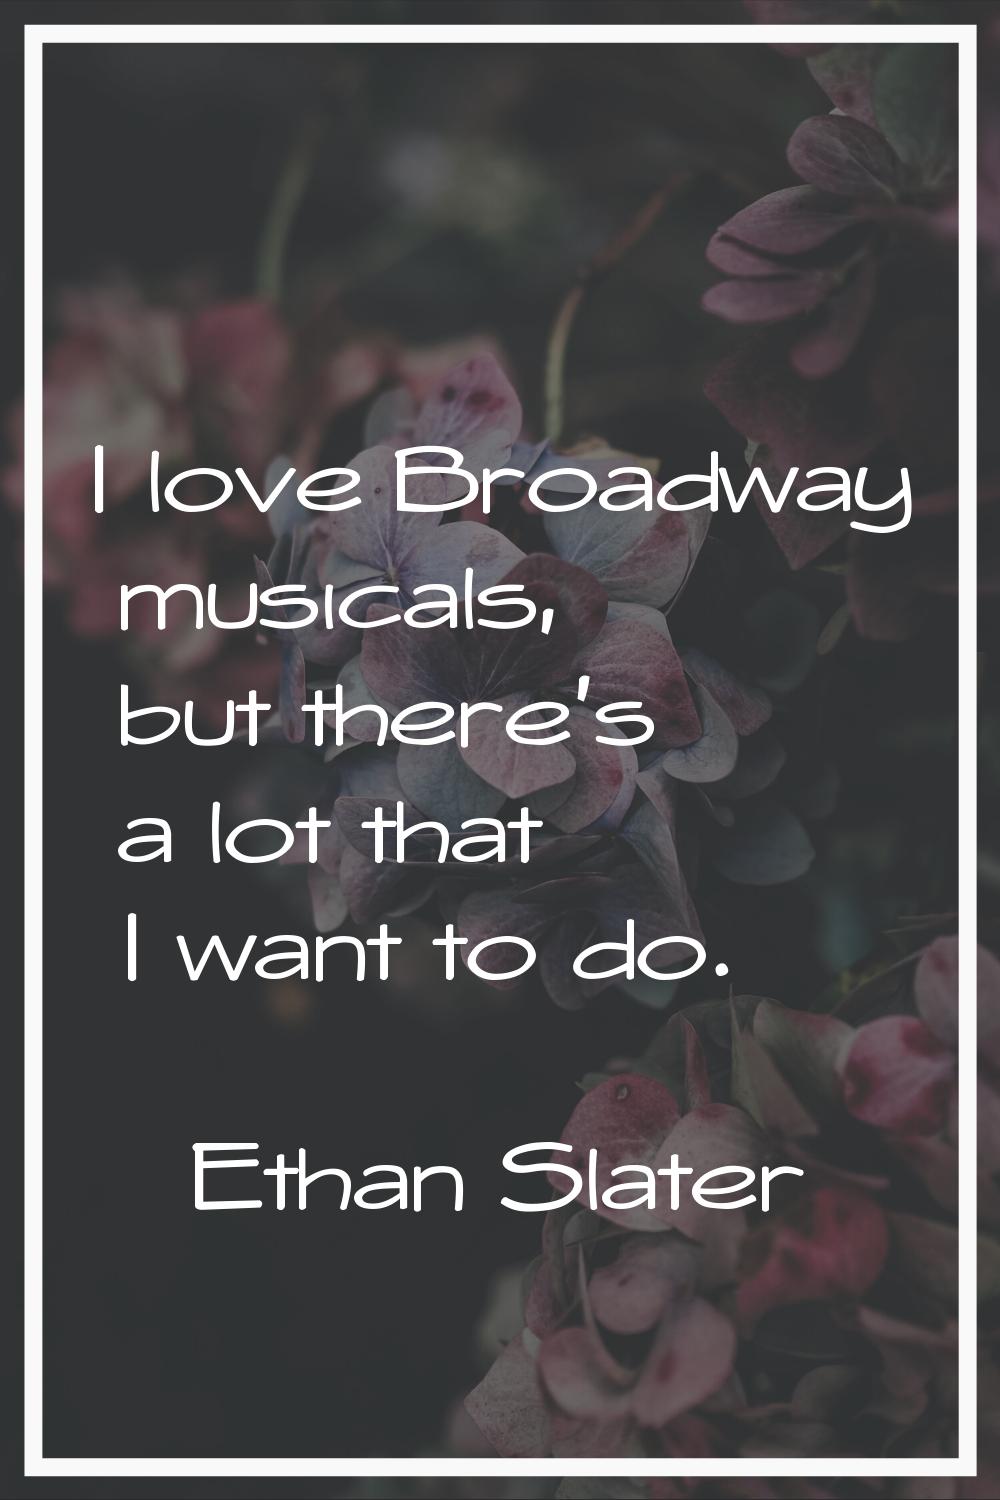 I love Broadway musicals, but there's a lot that I want to do.